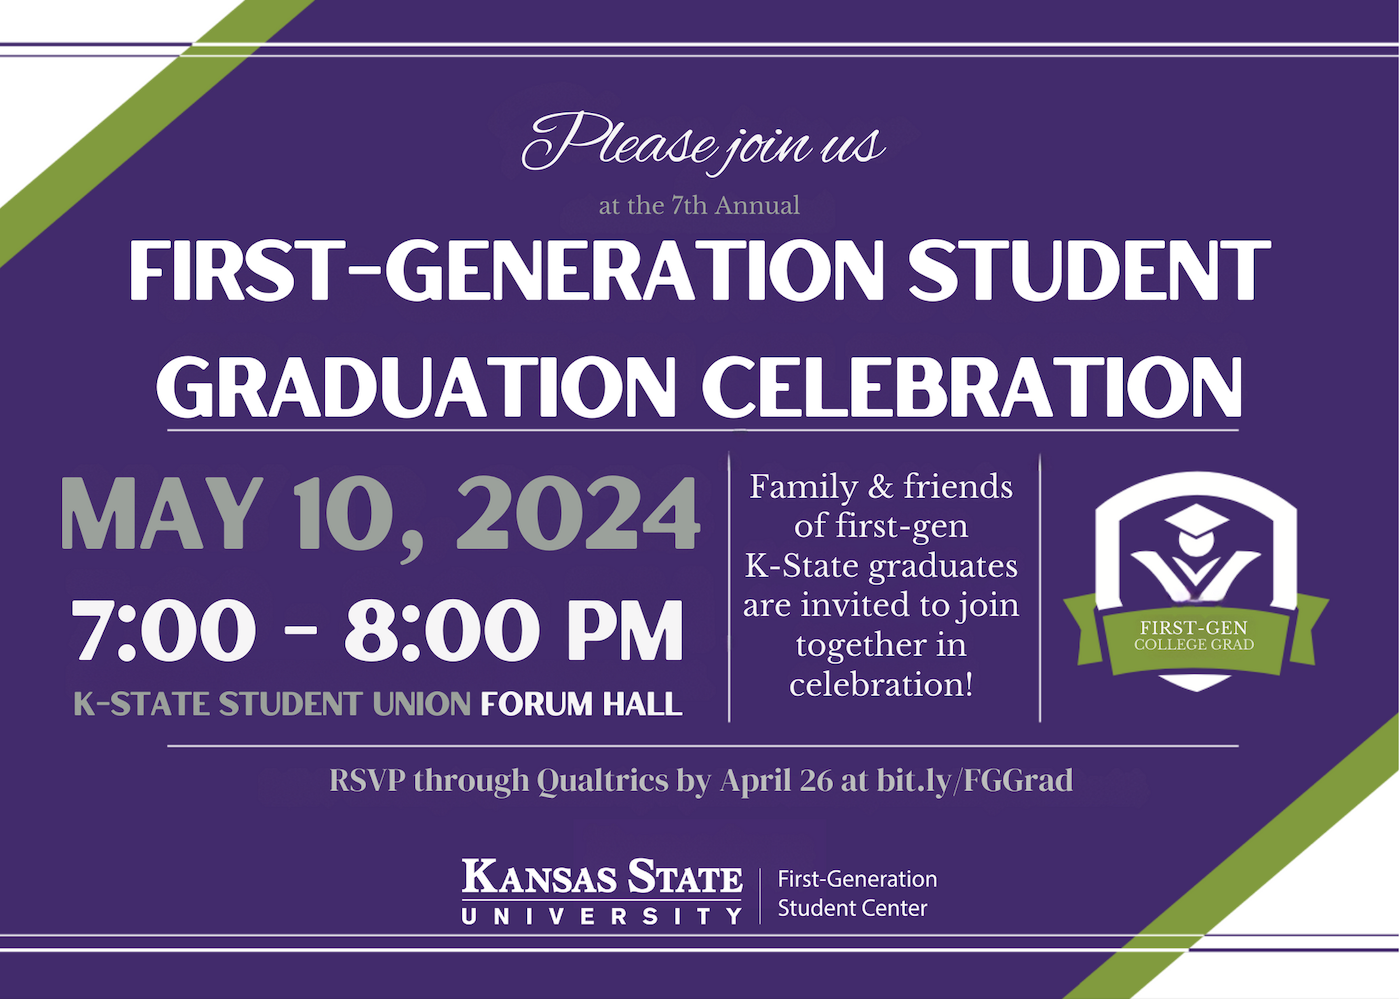 Invitation for the 7th Annual First-generation Graduation Celebration on May 10th at 7 pm in Forum Hall. RSVP at bit.ly/FGGrad by April 26th.